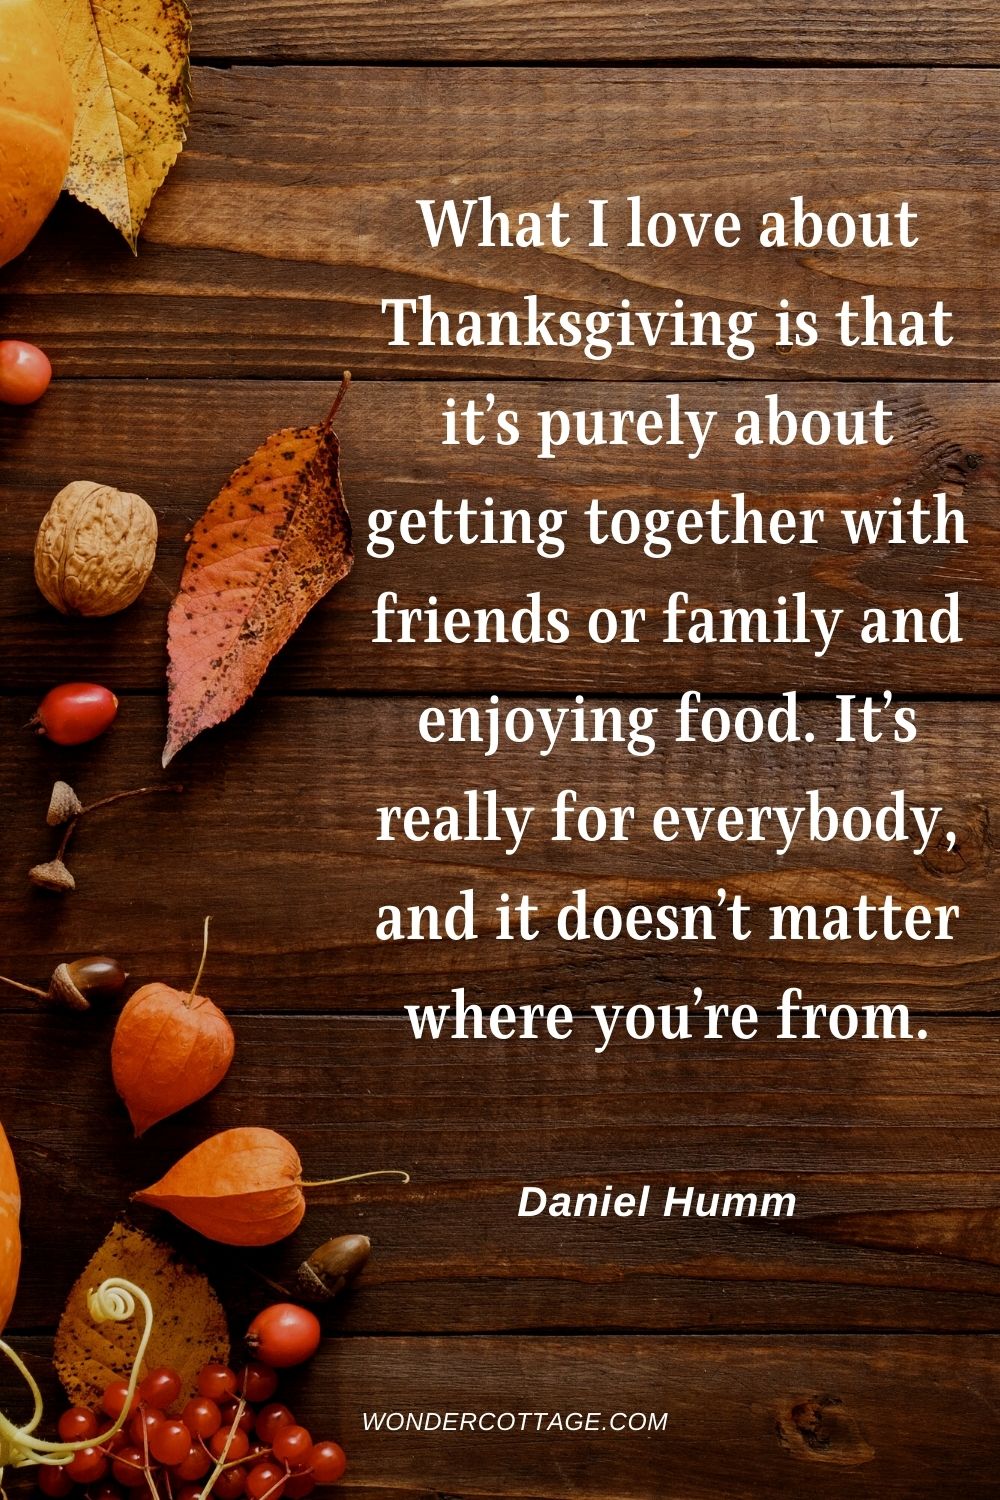 What I love about Thanksgiving is that it’s purely about getting together with friends or family and enjoying food. It’s really for everybody, and it doesn’t matter where you’re from. Daniel Humm